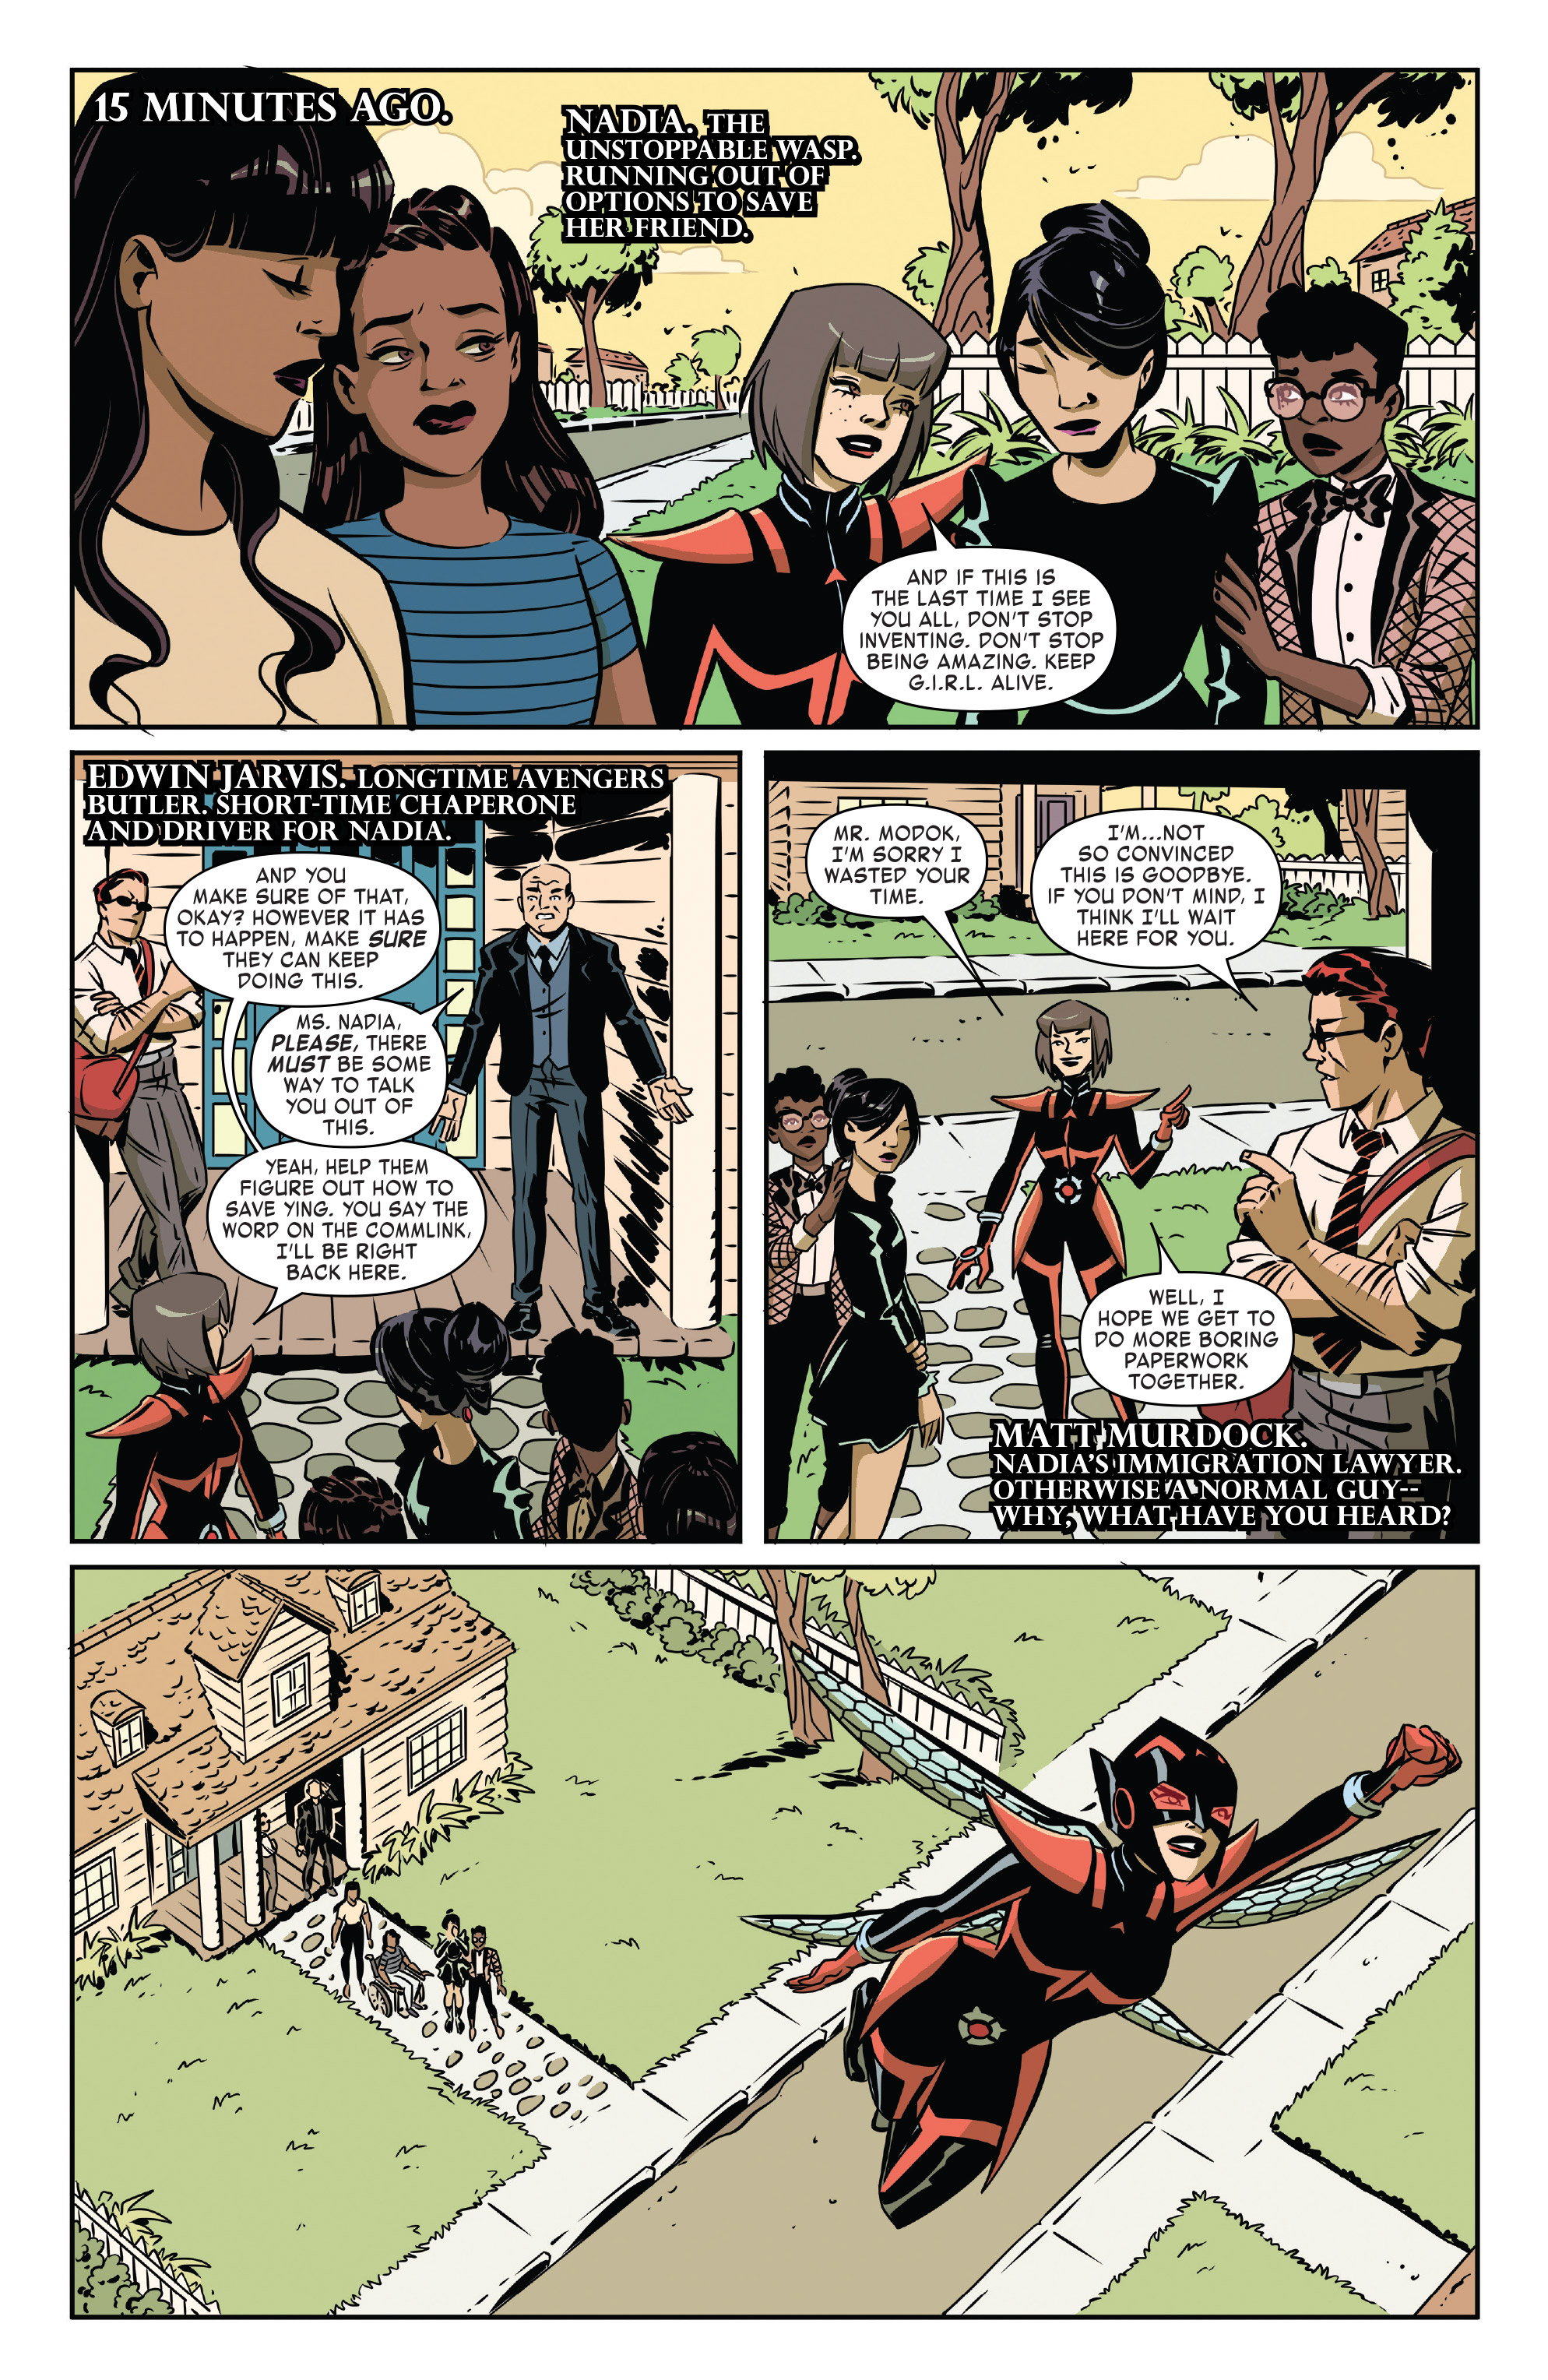 The Unstoppable Wasp (2017-): Chapter 6 - Page 3